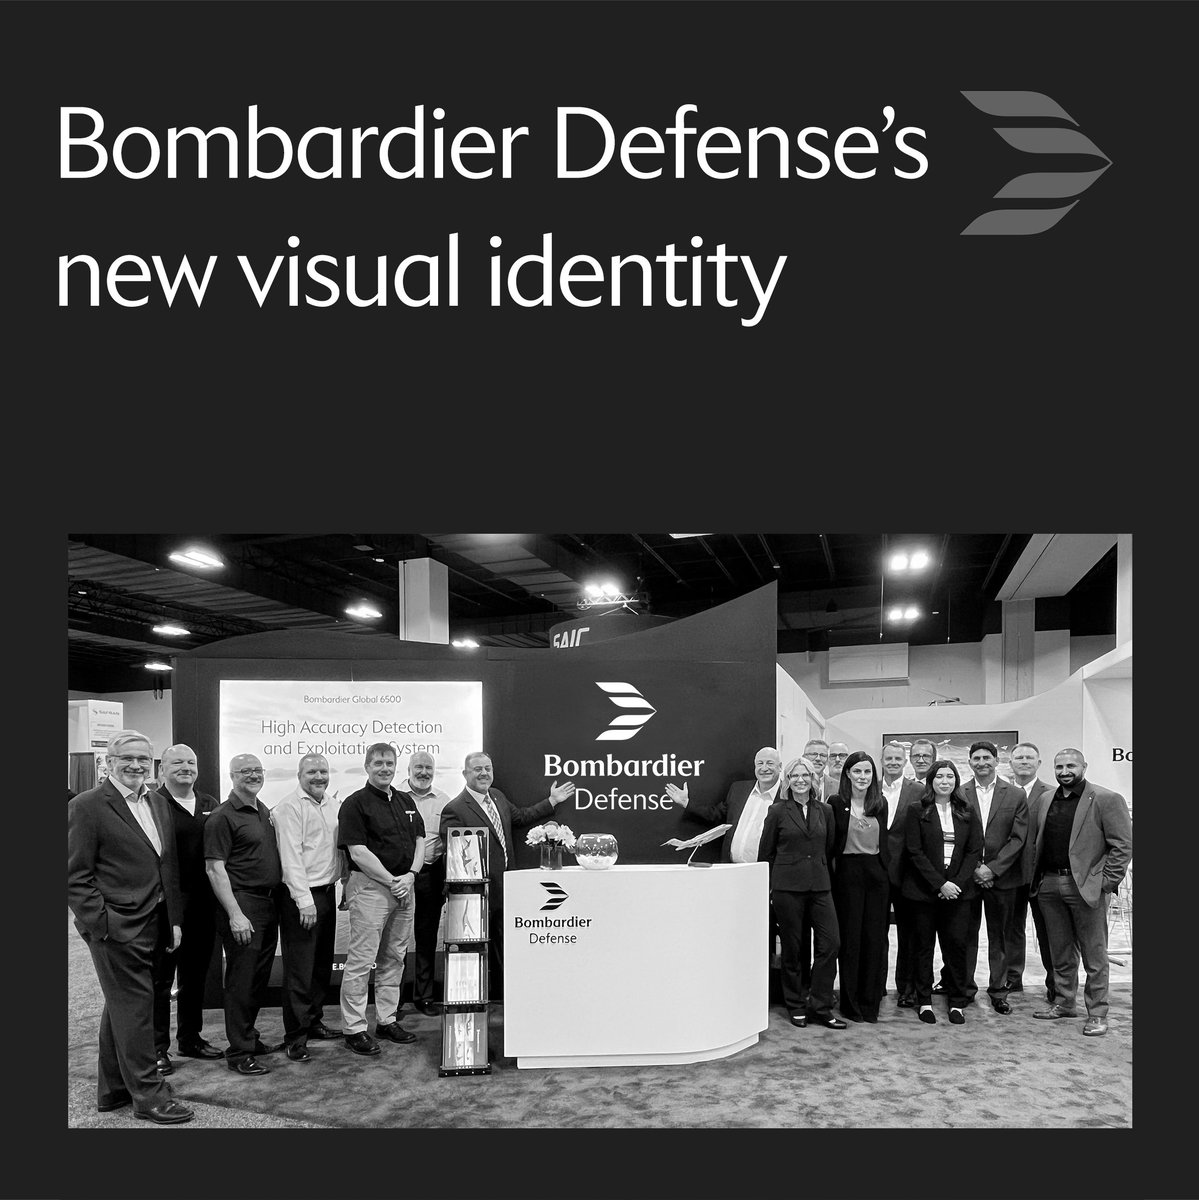 #BombardierDefense's team was thrilled to announce the unveiling of our new brand identity at the @Army_Aviation Mission Solutions #24Summit in Denver, Colorado.